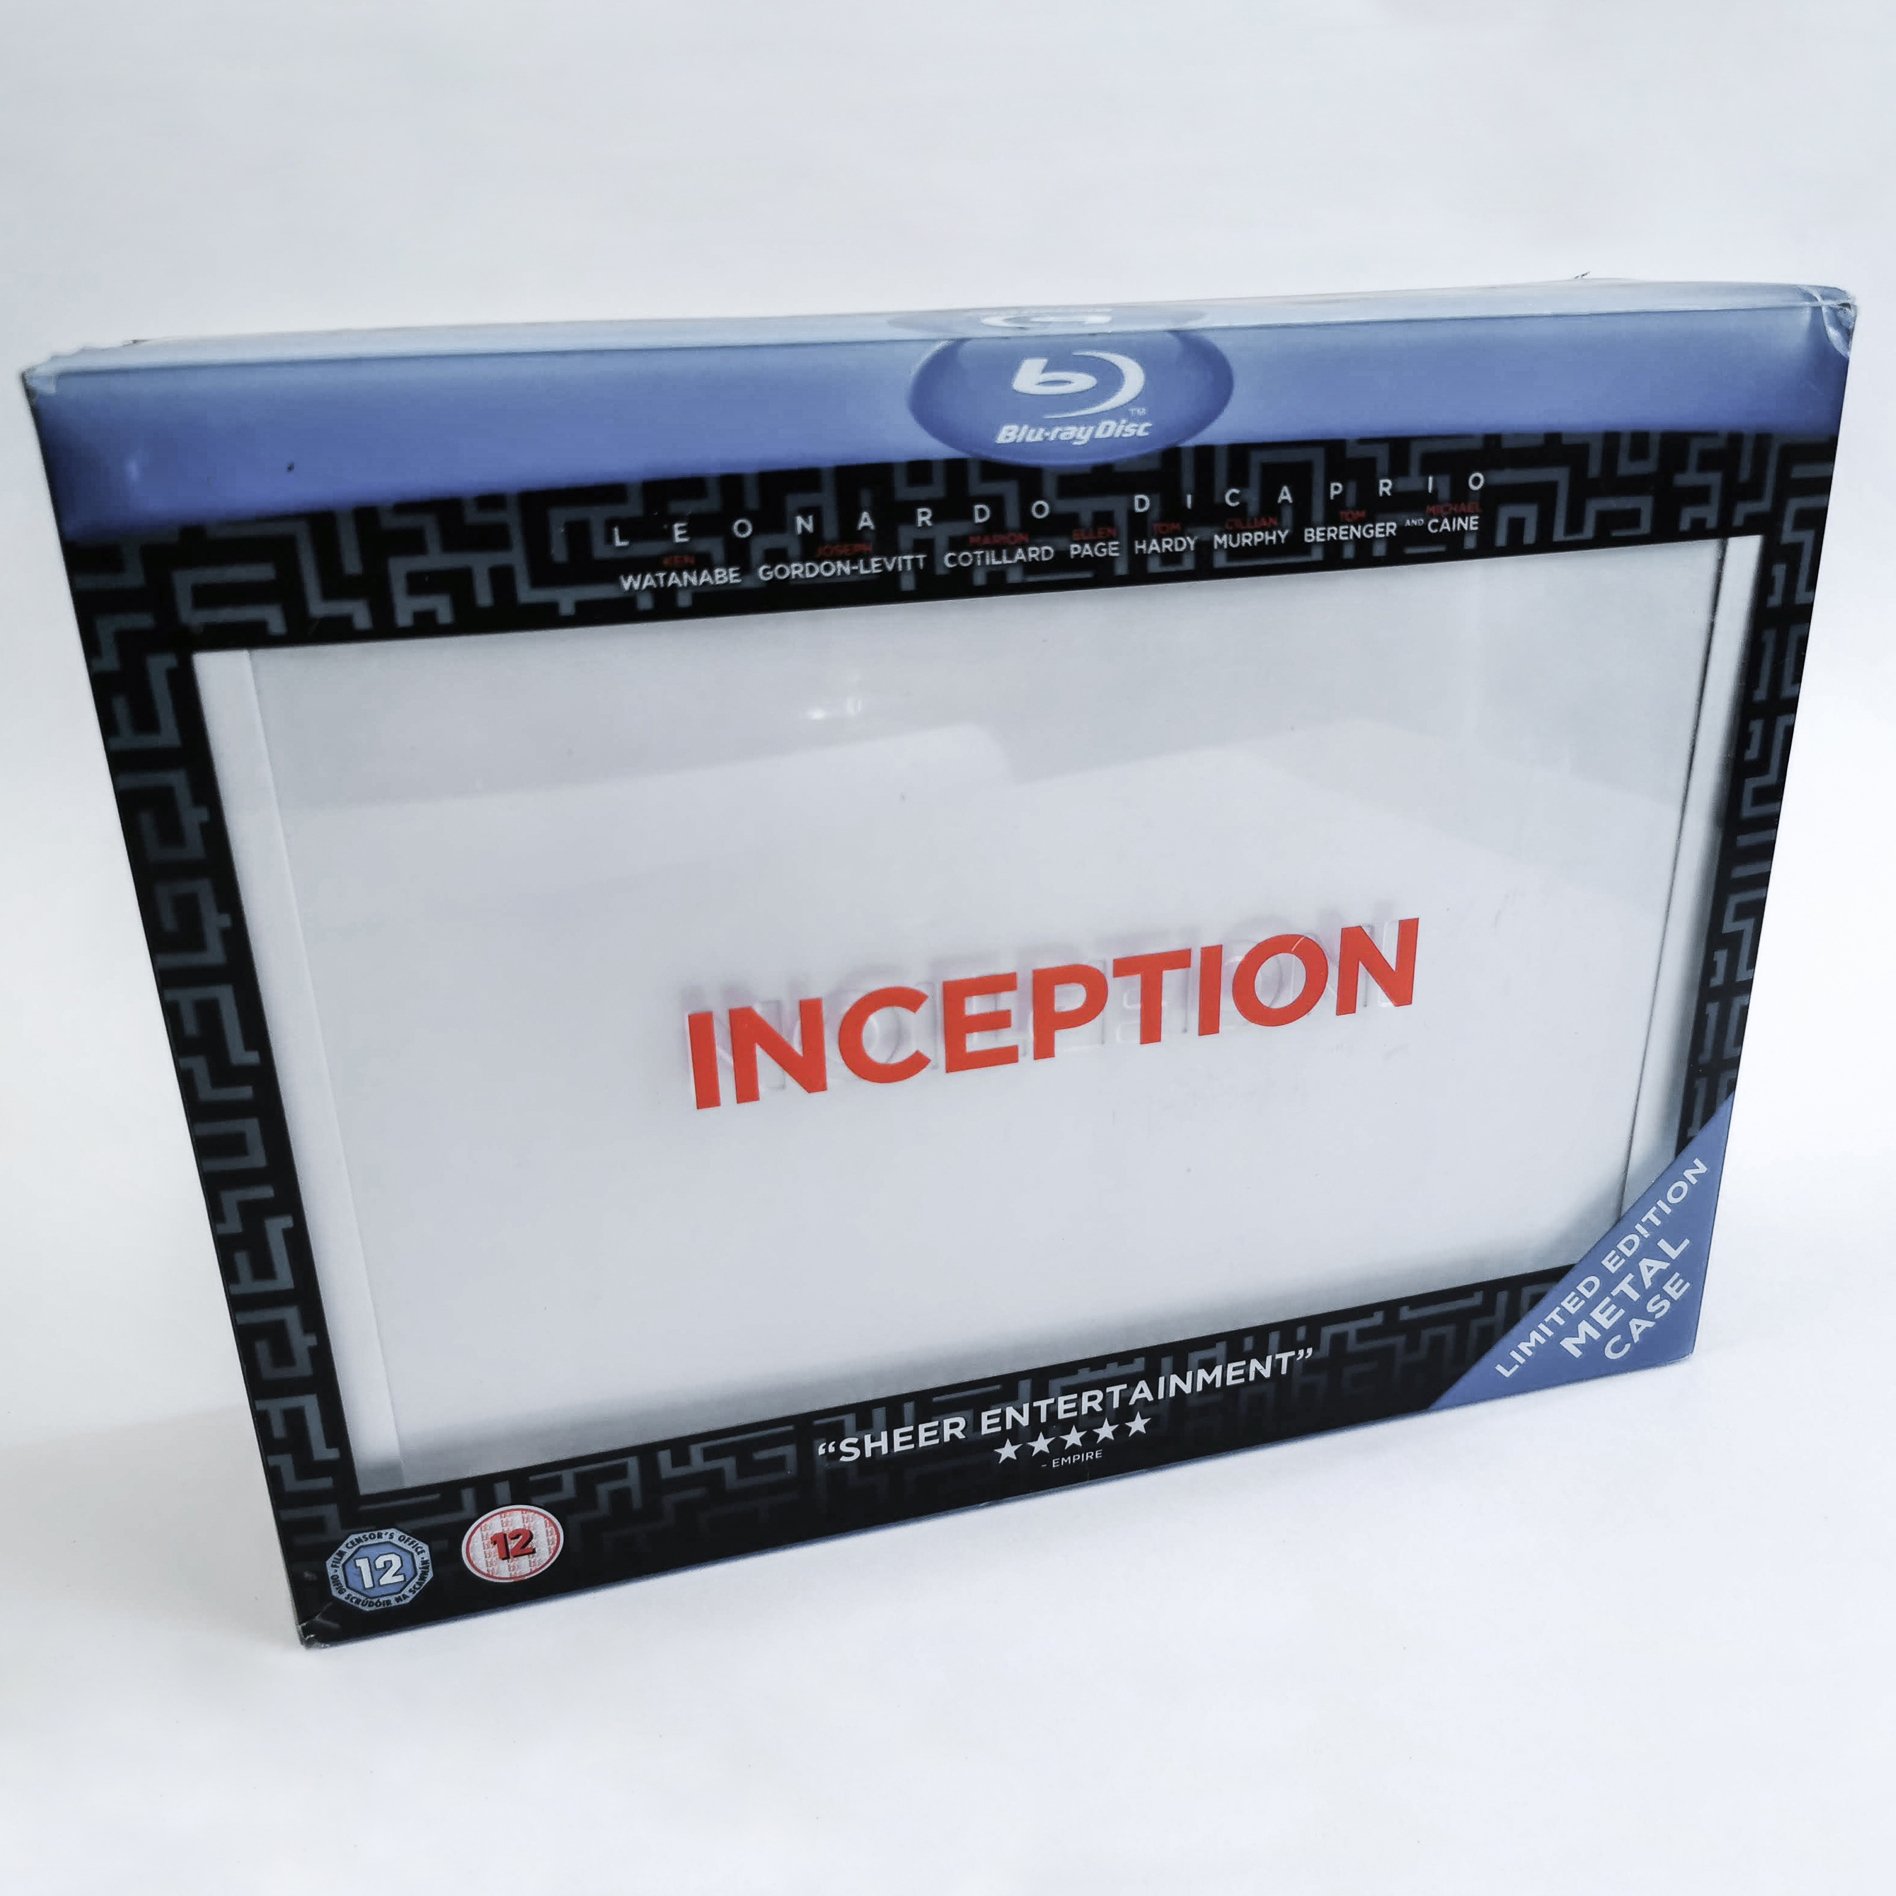 Inception (Limited Edition Blu-ray Metal Case)